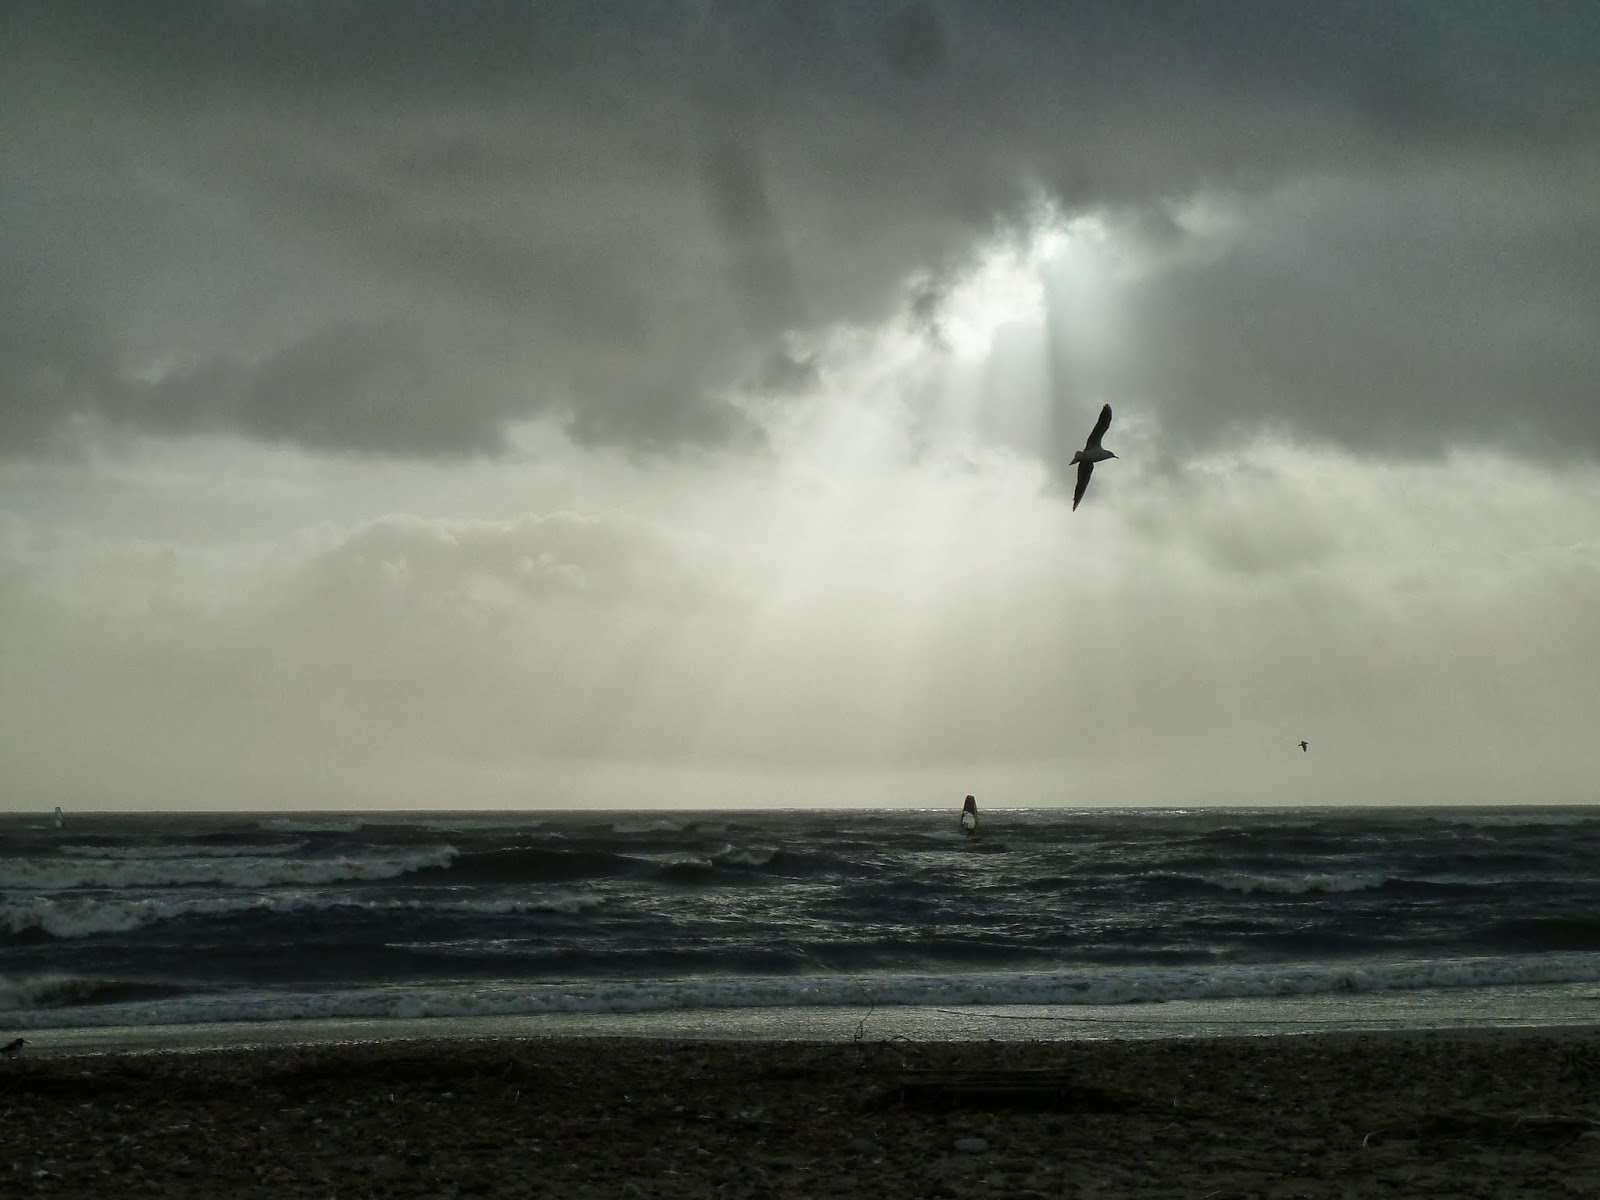 Seagull and windsurfer silhouetted against winter sky